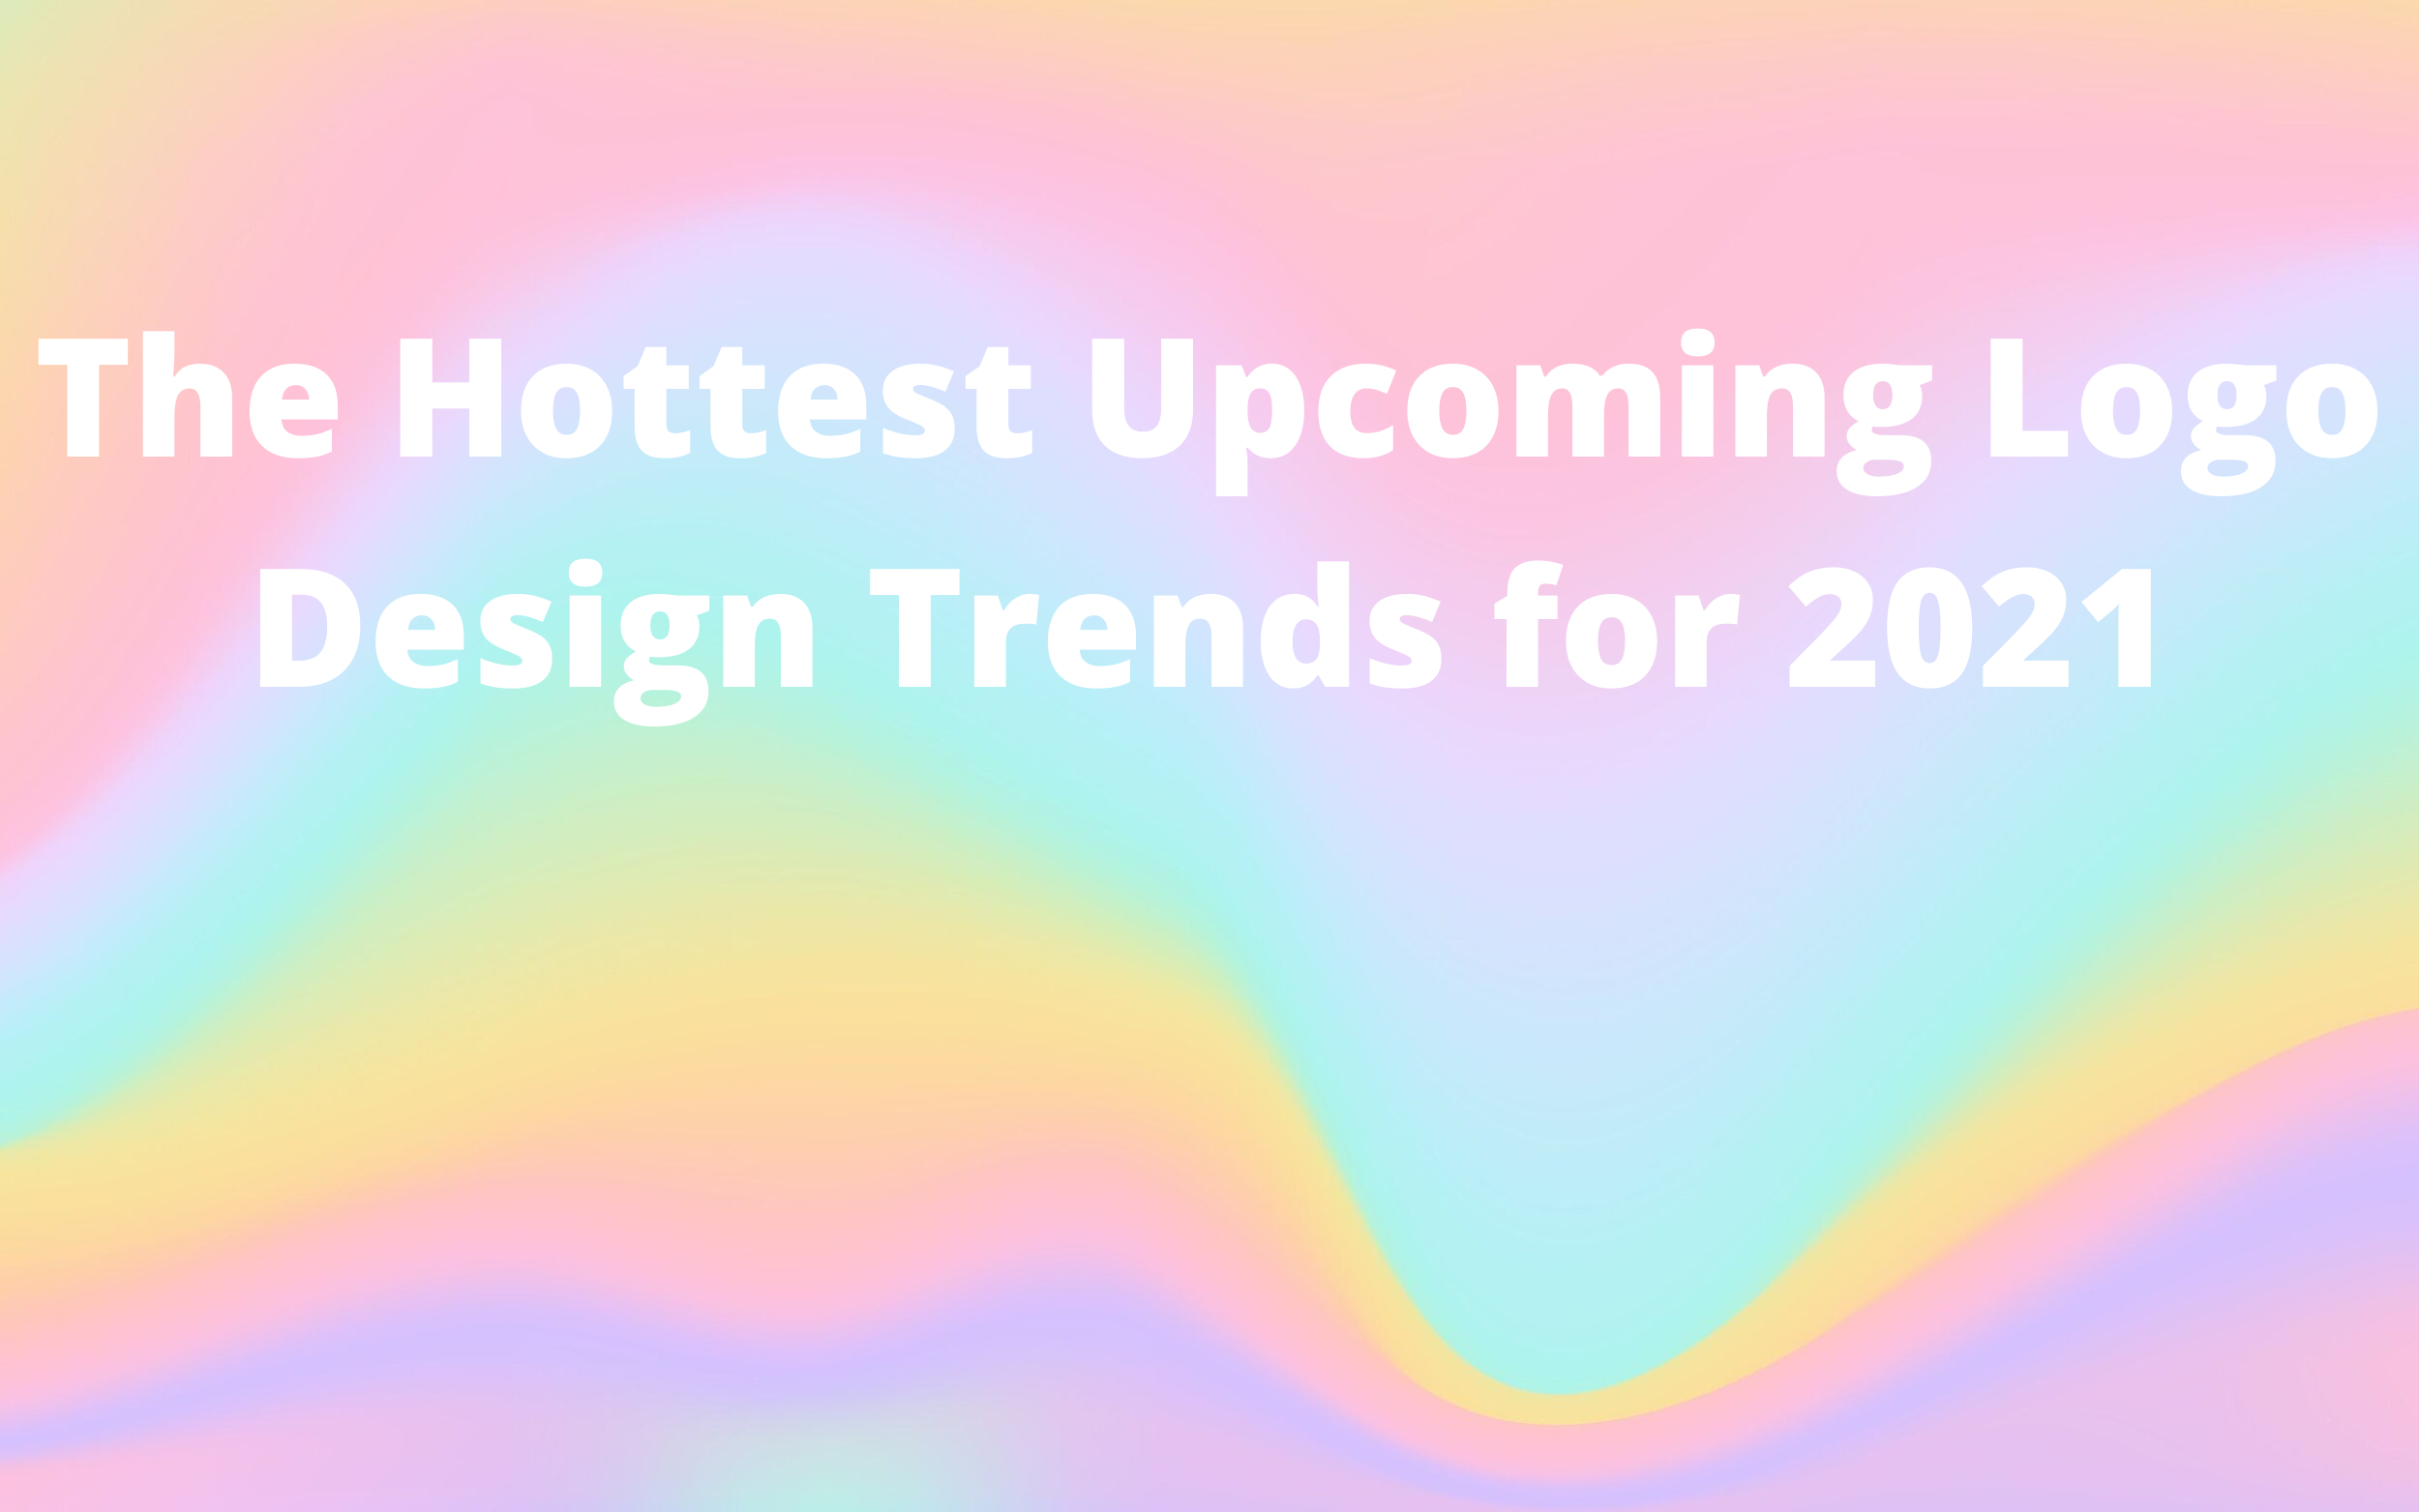 The Hottest Upcoming Logo Design Trends for 2021